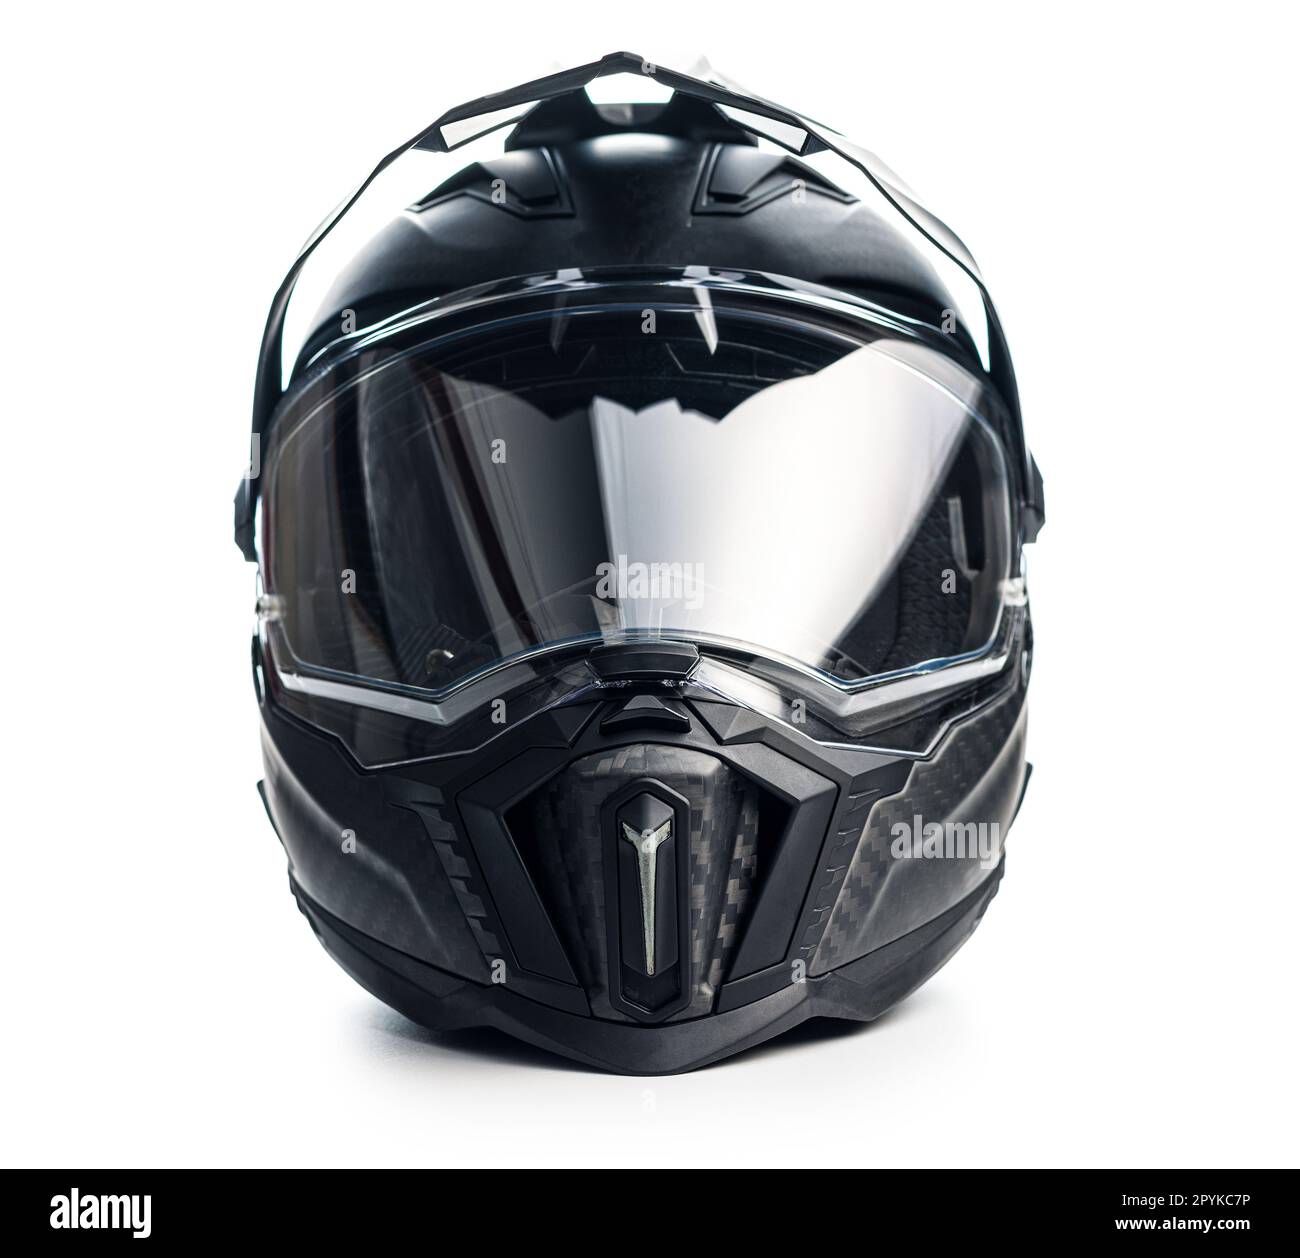 Black carbon motorcycle helmet. Offroad motocross helmet with shield isolated on white background. Stock Photo